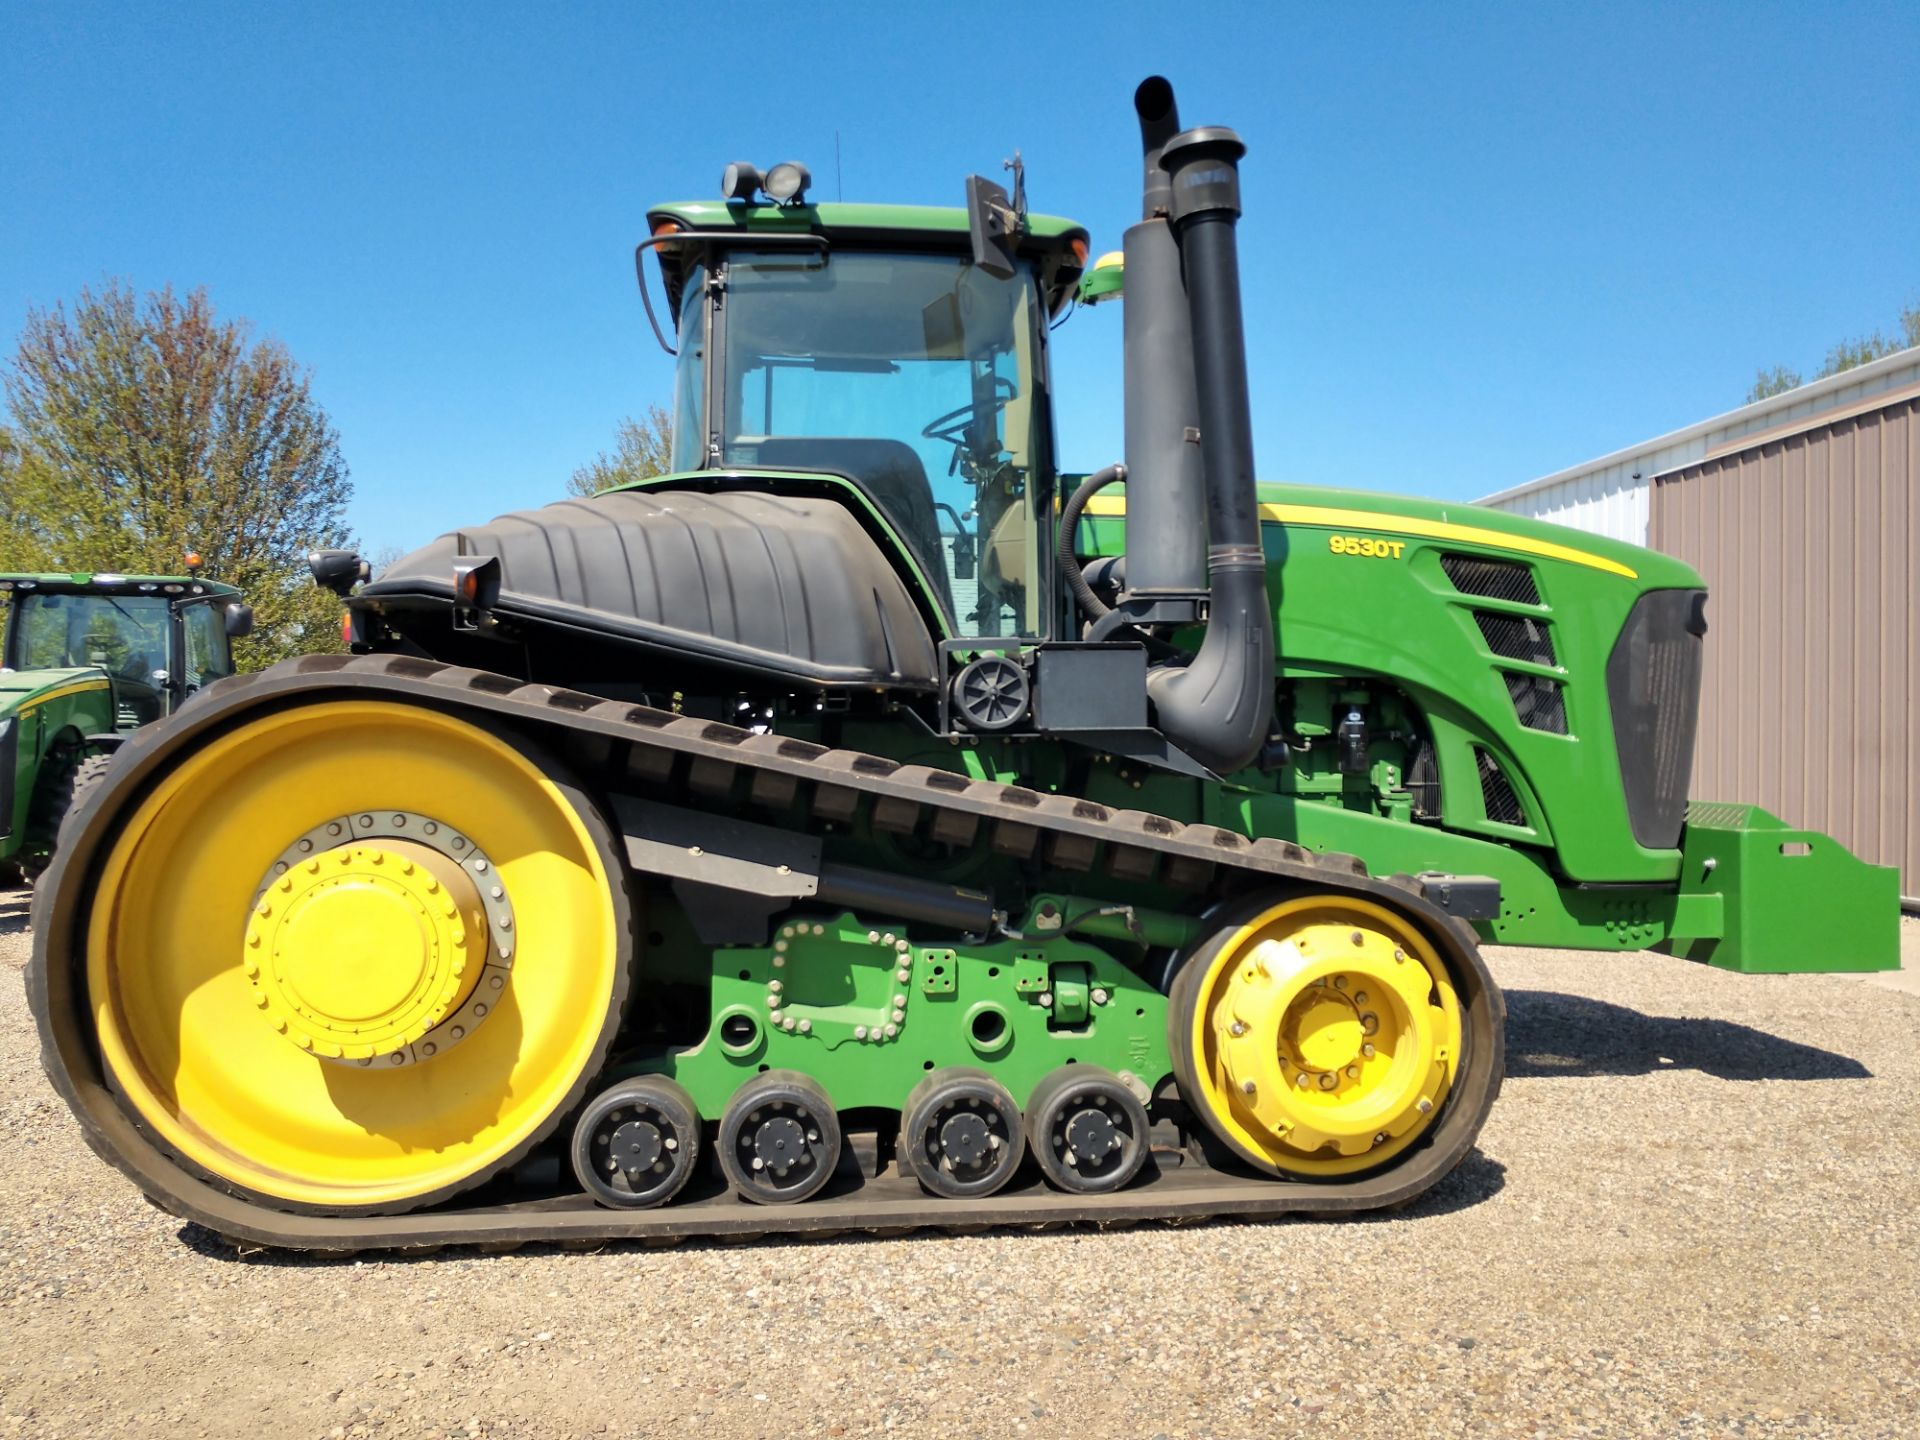 2009 JD 9530T 475 HP Tractor with power shift, heavy duty Durabilt 5500 36 inch wide tracks in - Image 3 of 3